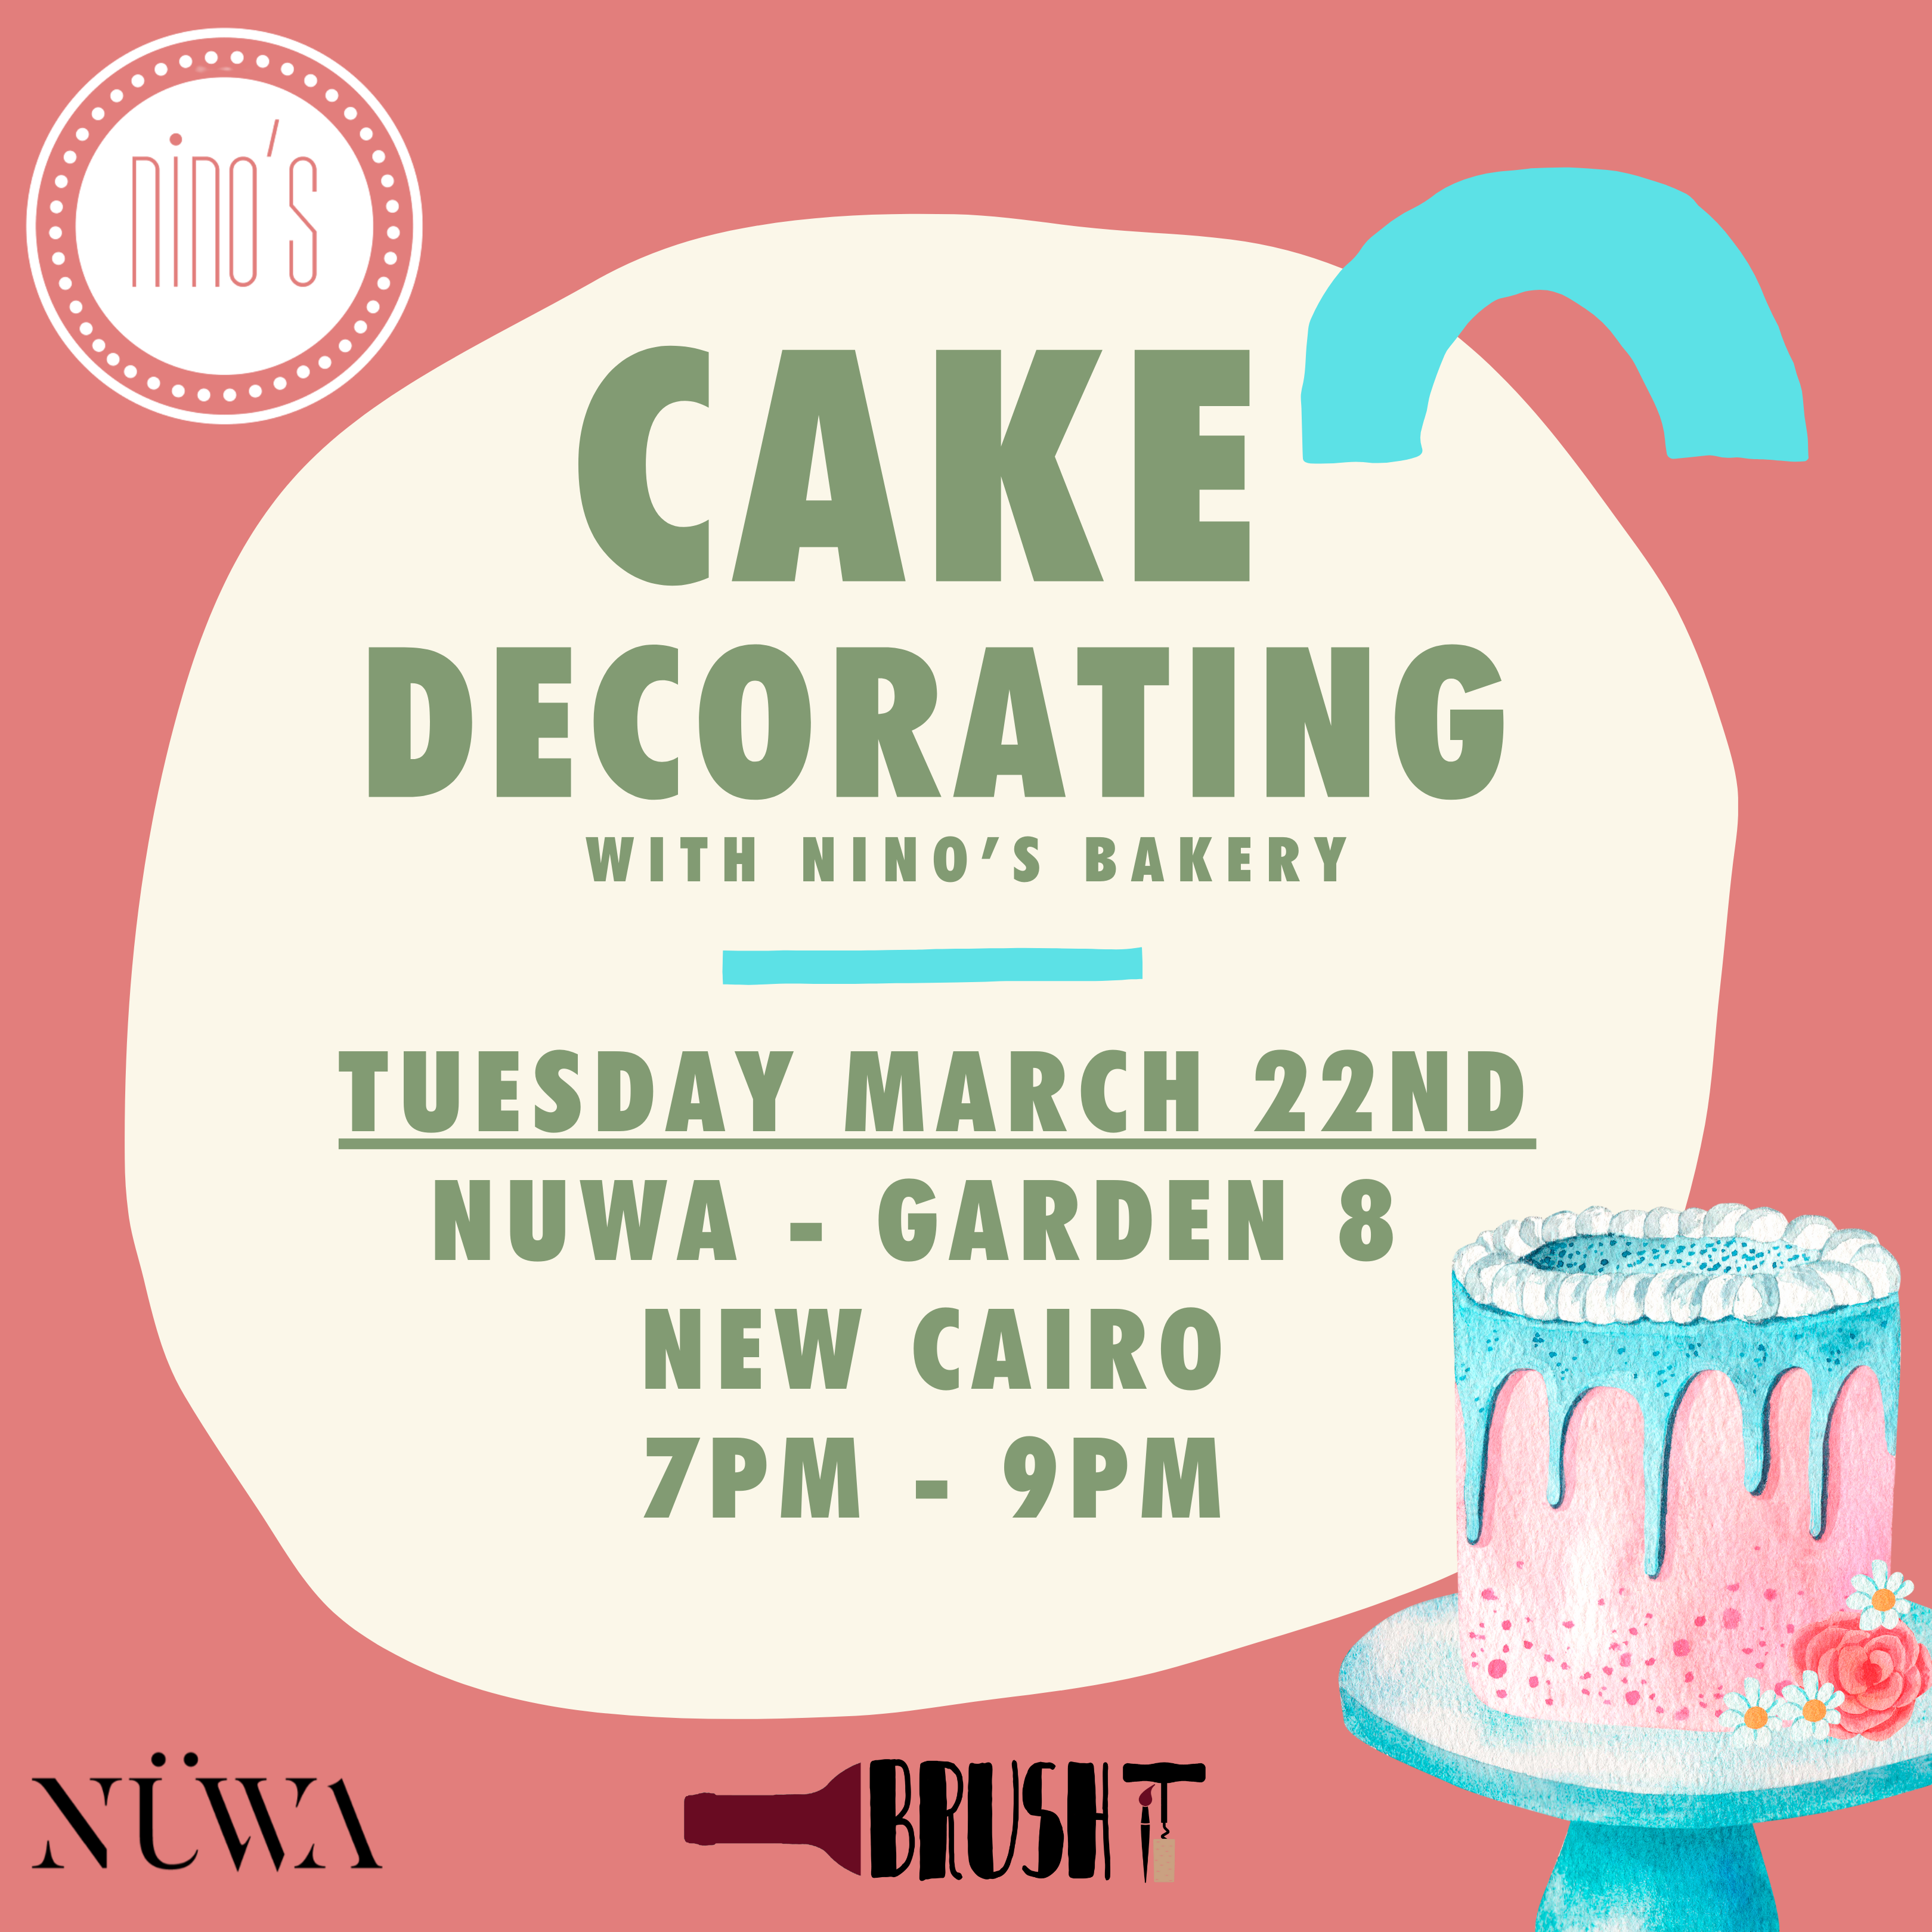 *CAKE DECORATING* TUESDAY, March 22nd - 7:00 pm - 9:00 pm - NEW CAIRO - NUWA - GARDEN 8